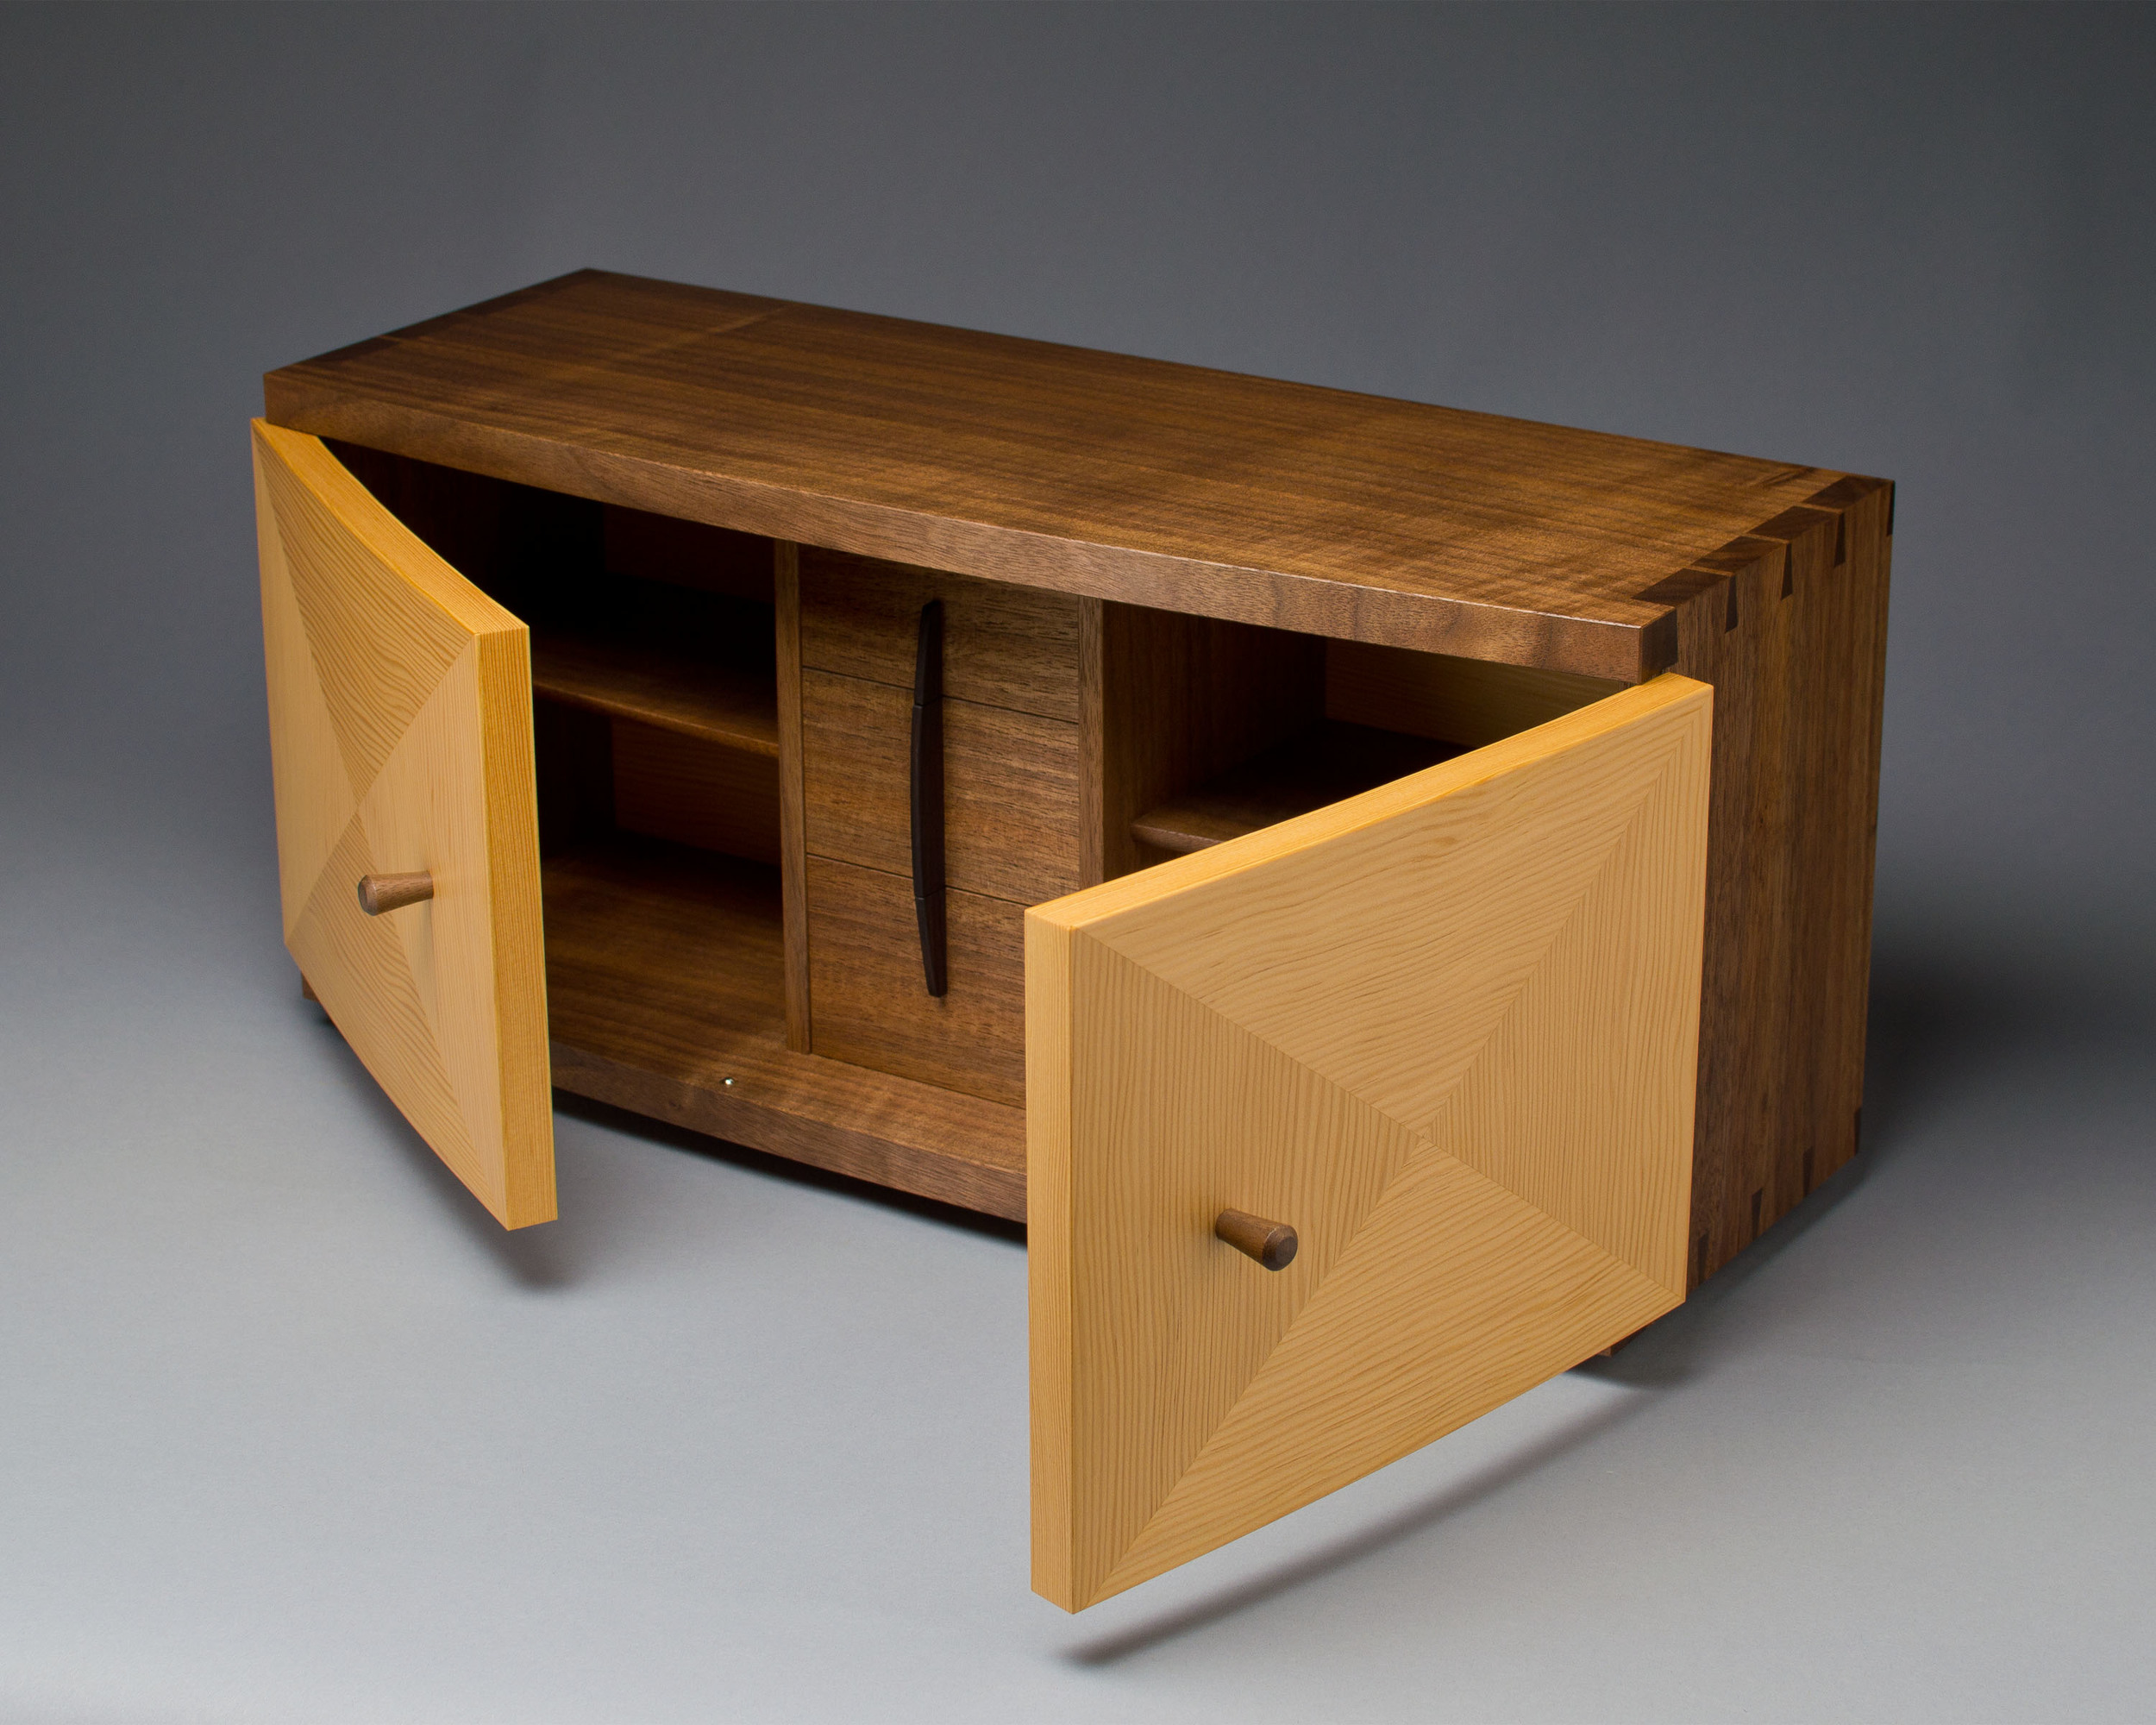 the doors of the cabinet are curved, made with laminations of douglas-fir veneer